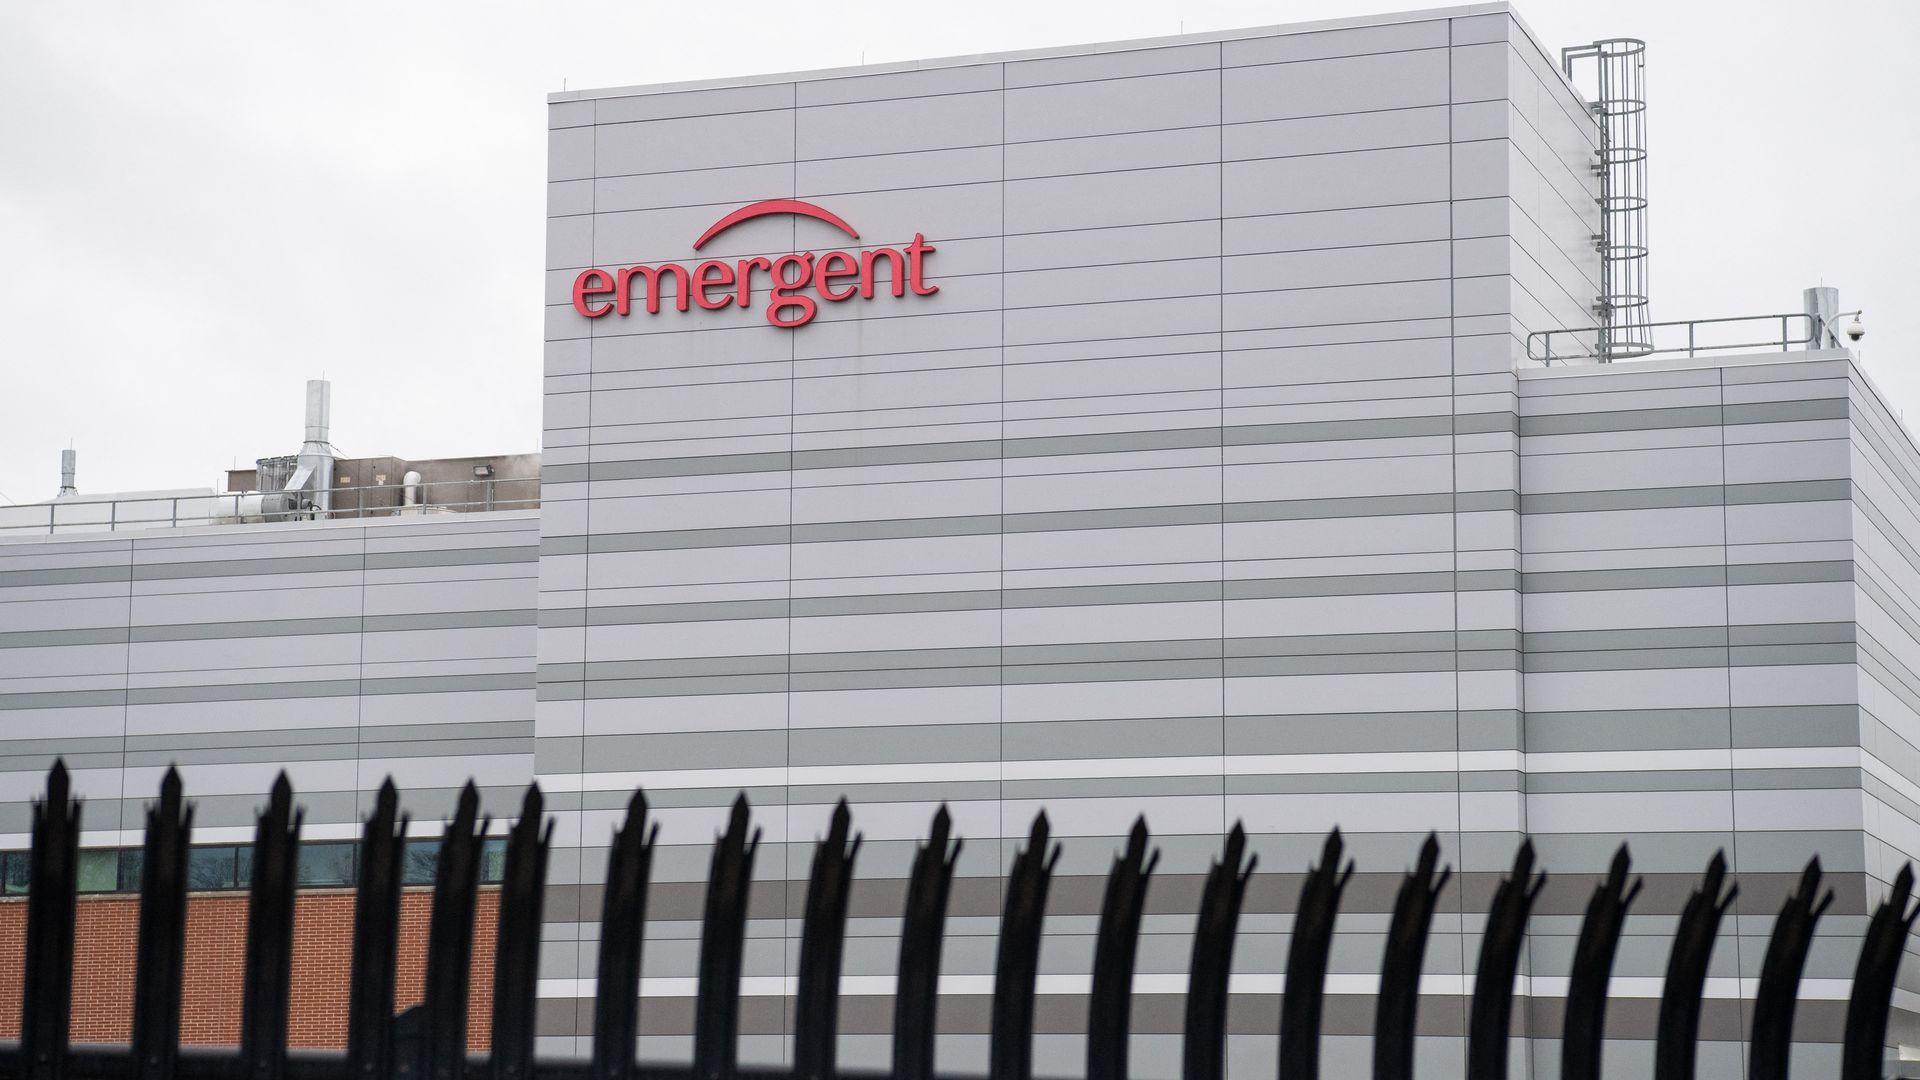 Picture of the Emergent BioSolutions plant